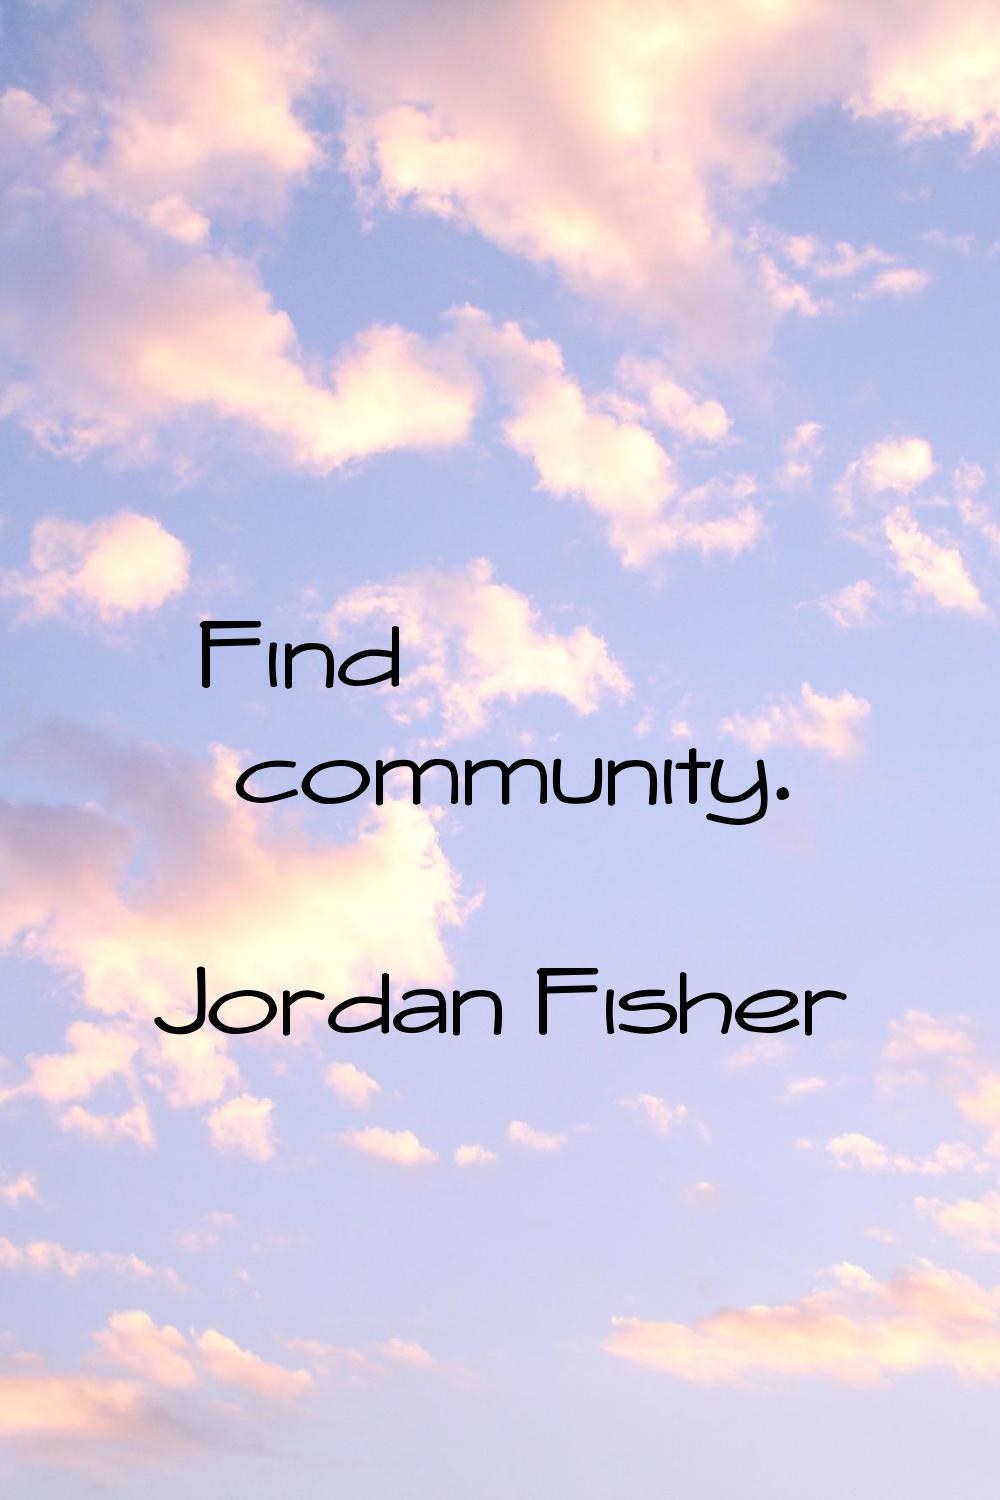 Find community.